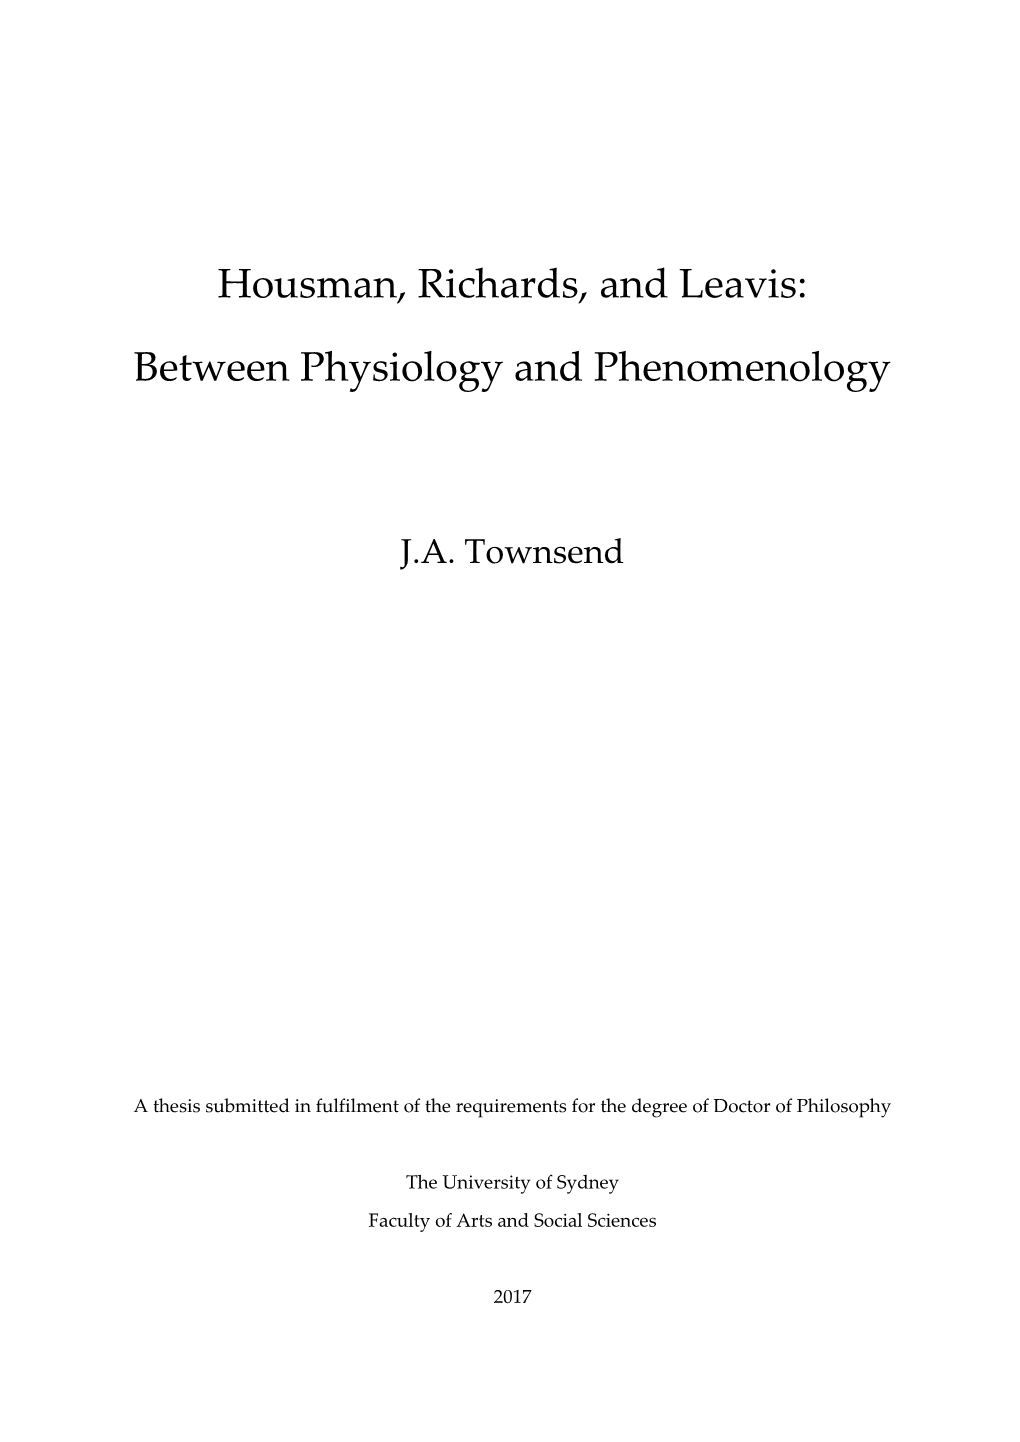 Housman, Richards, and Leavis: Between Physiology and Phenomenology